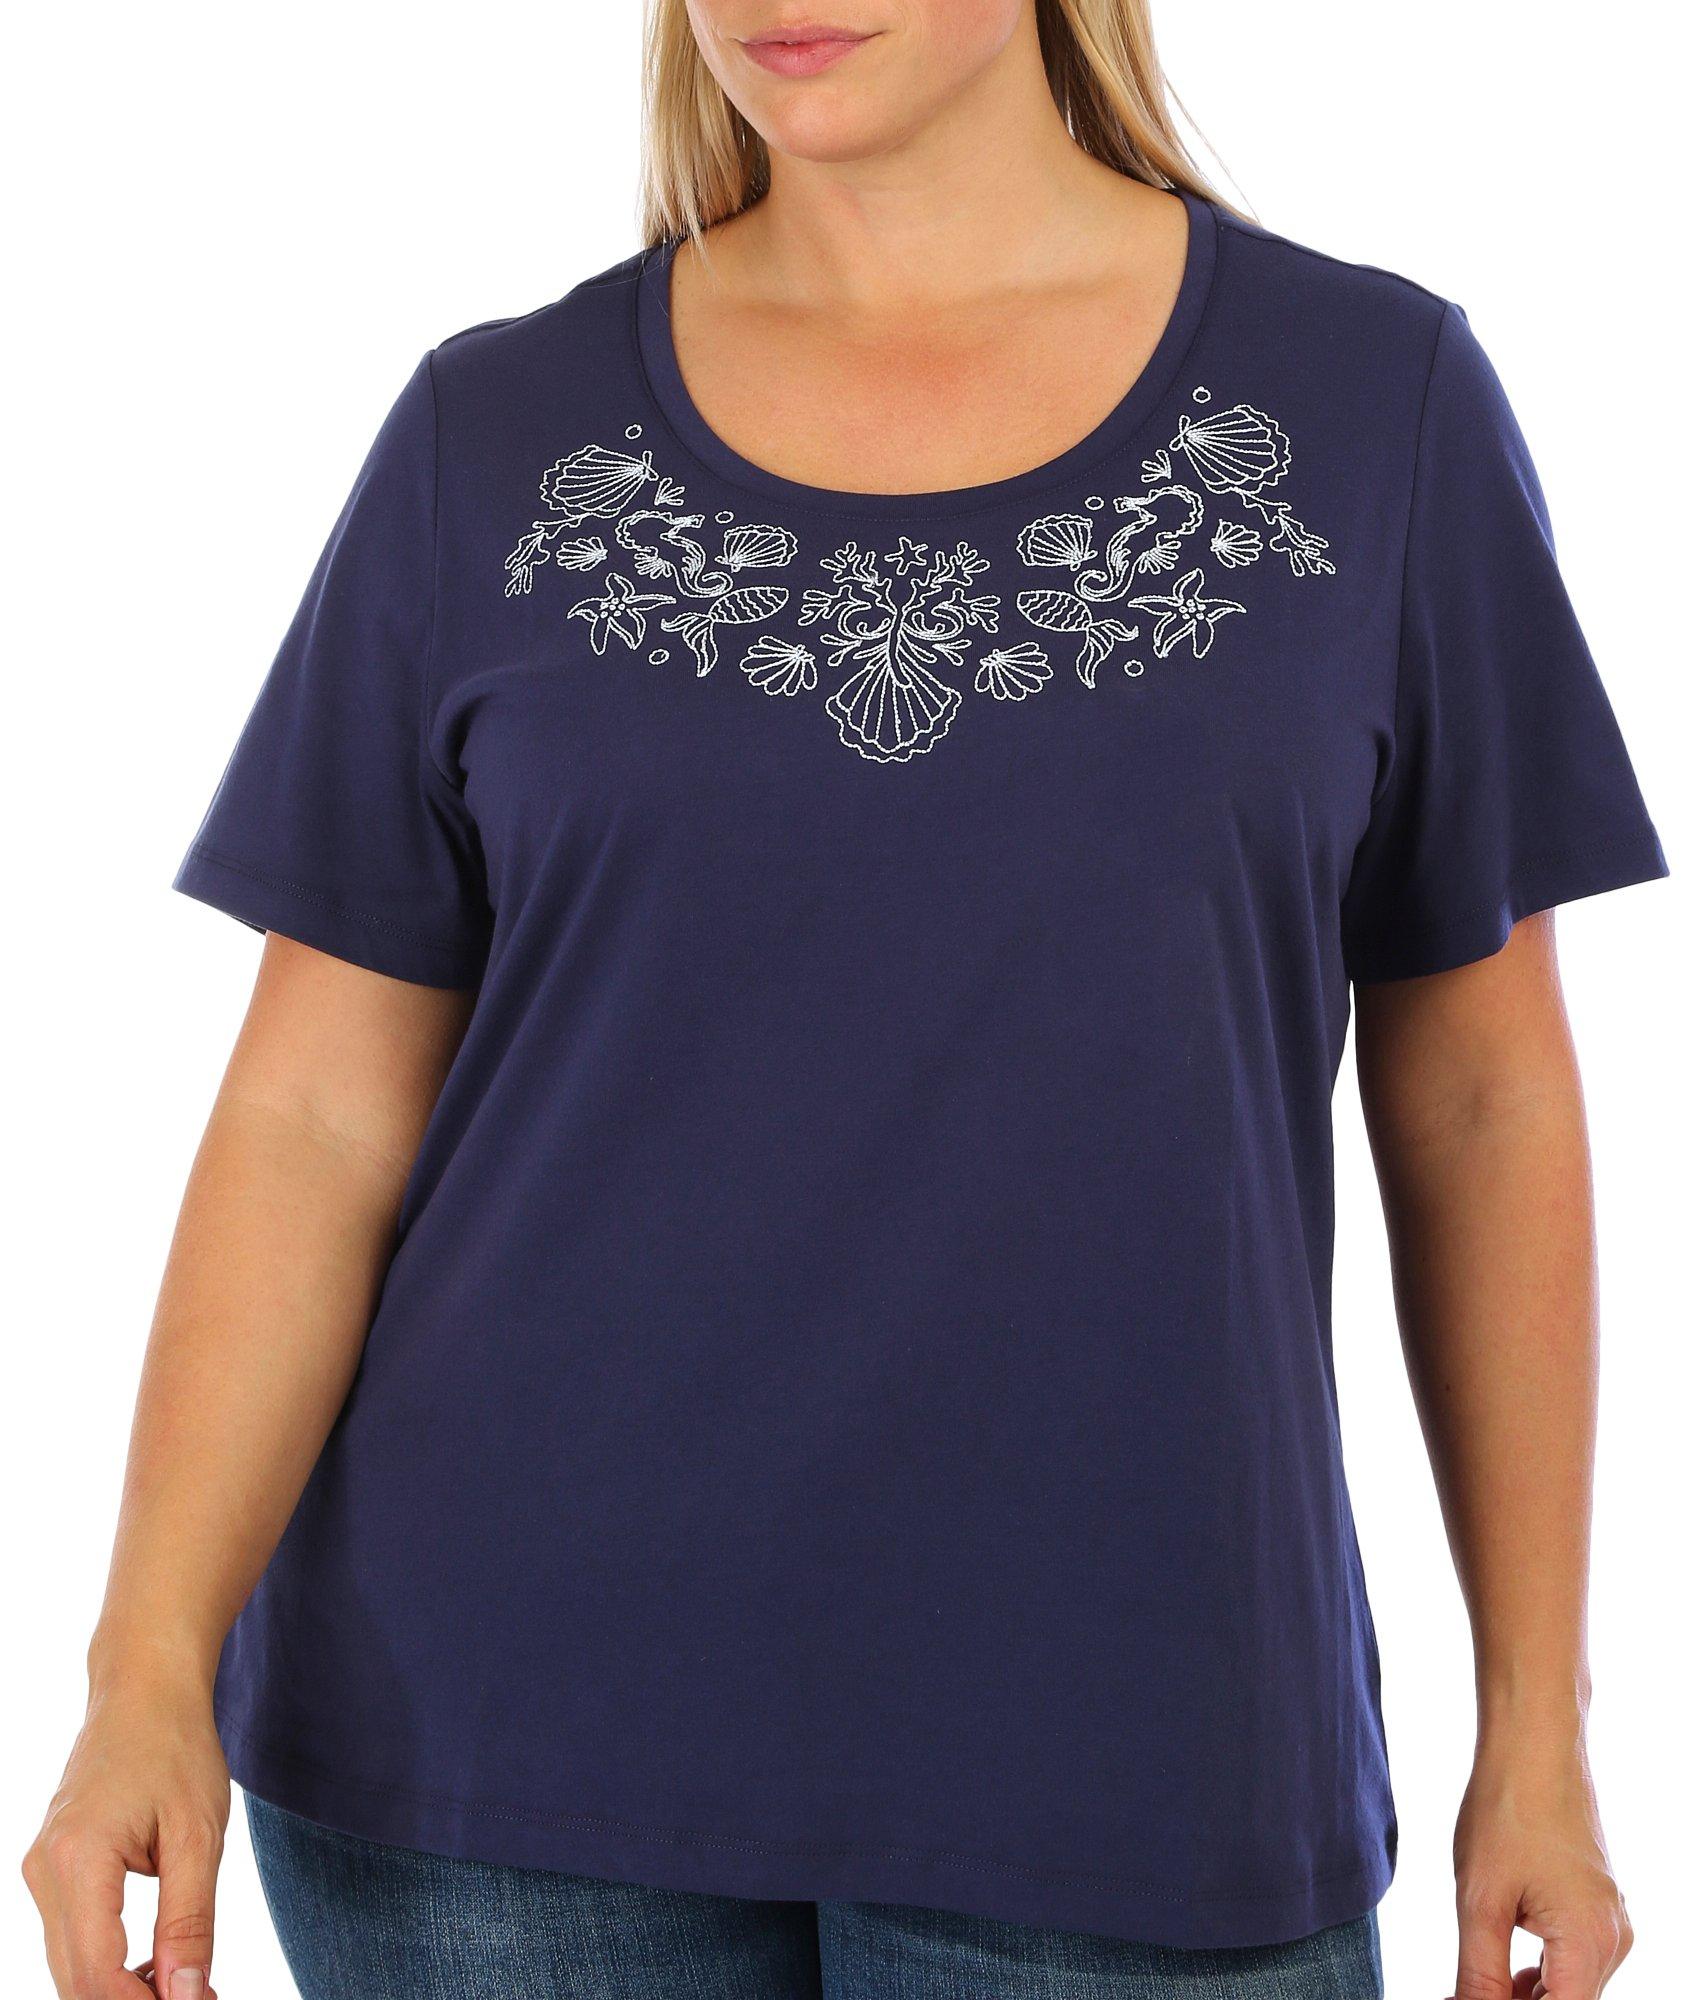 Plus Sealife Embroidery Short Sleeve Top